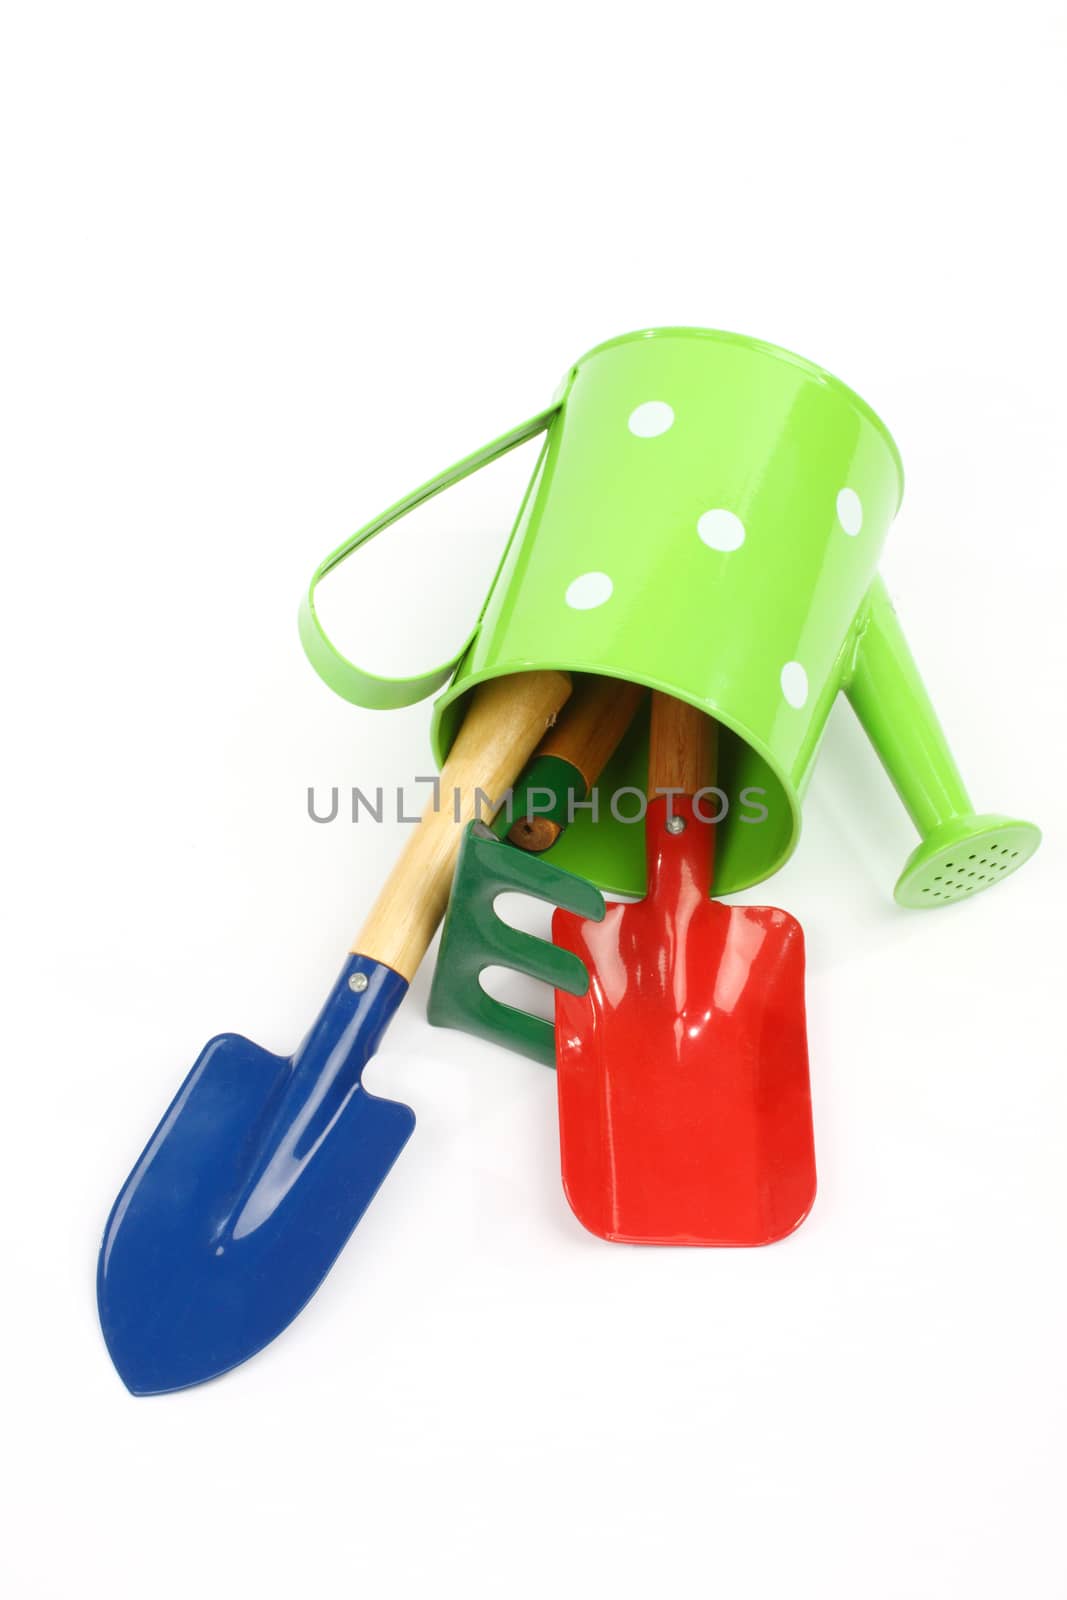 Color garden tools and watering can on white